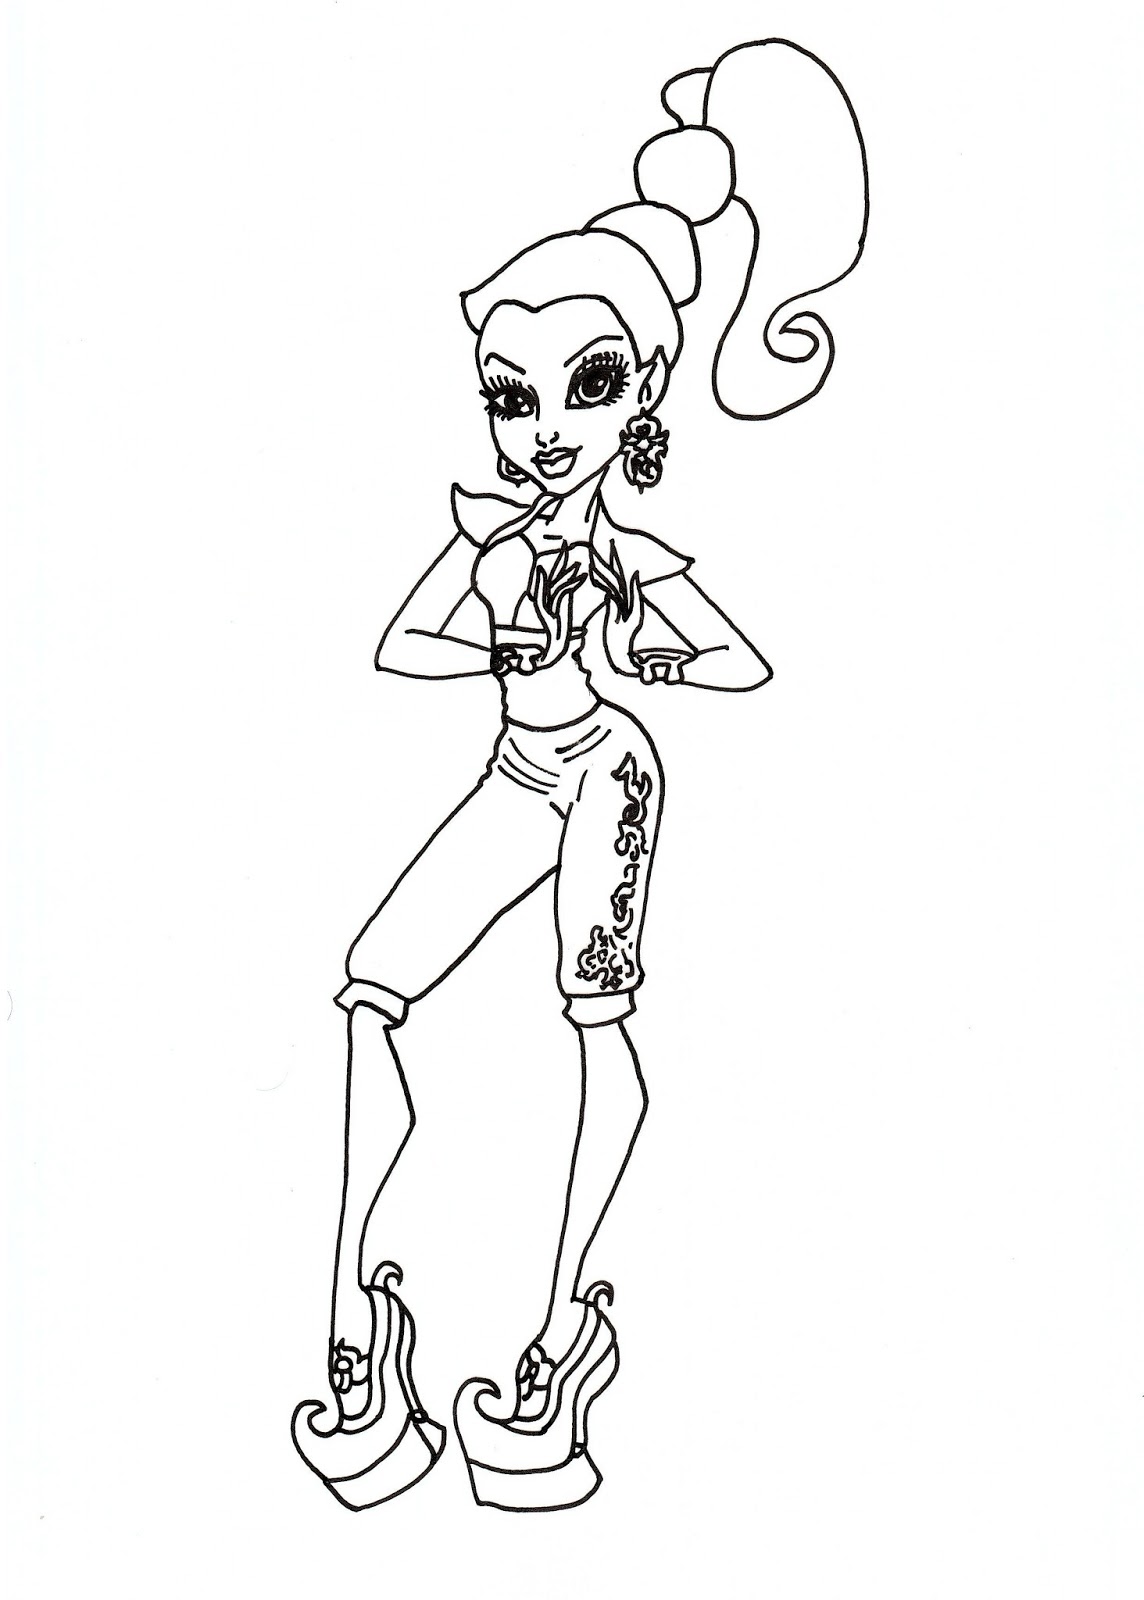 Free Printable Monster High Coloring Pages: Free Gigi Grant Coloring Sheet